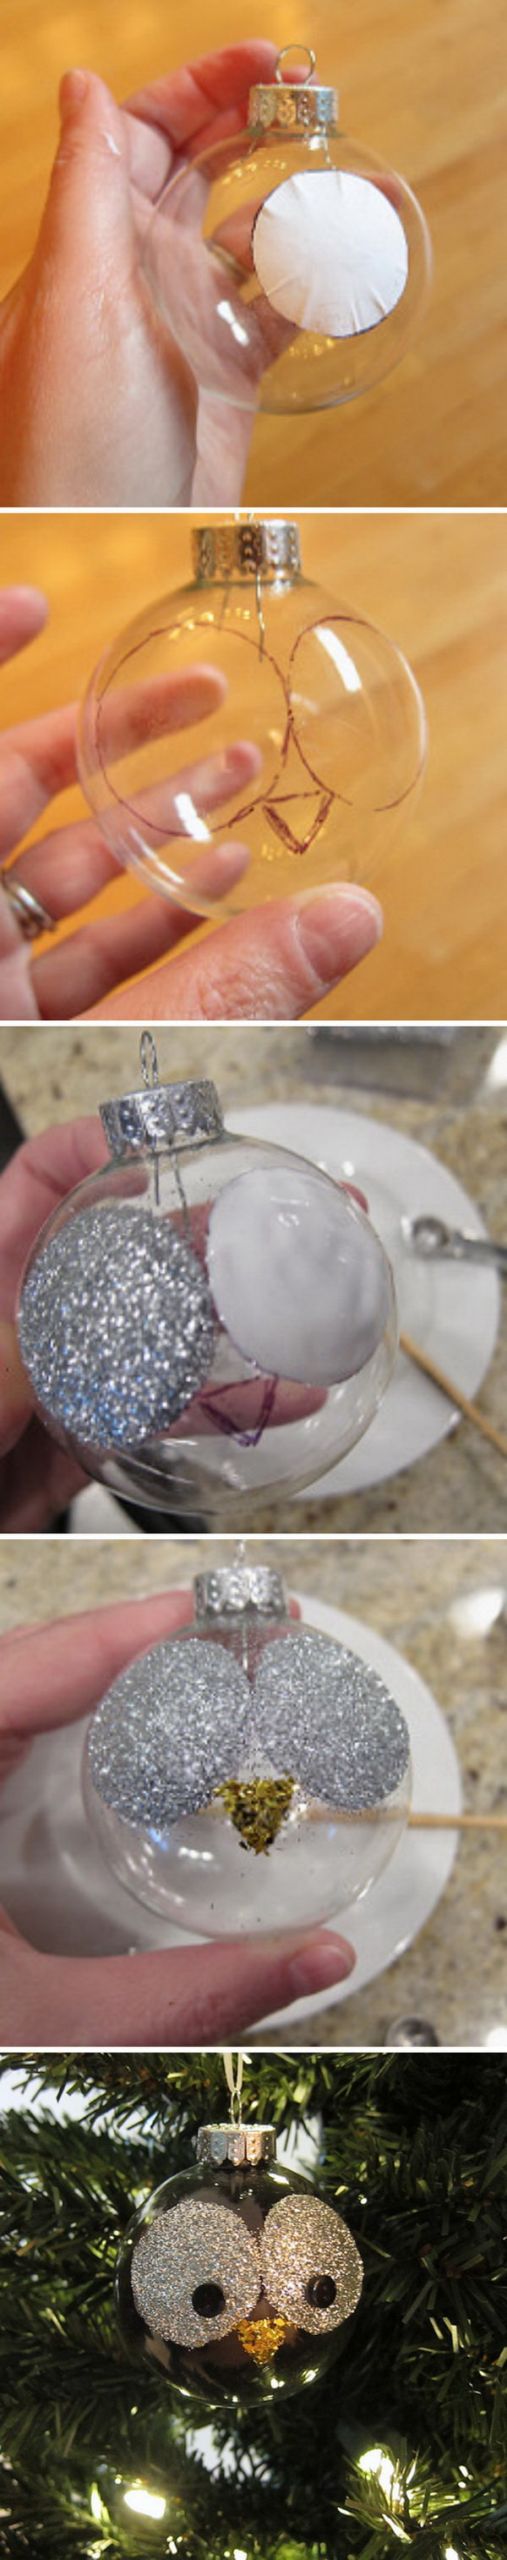 DIY Picture Christmas Ornaments
 30 Creative DIY Christmas Ornaments with Lots of